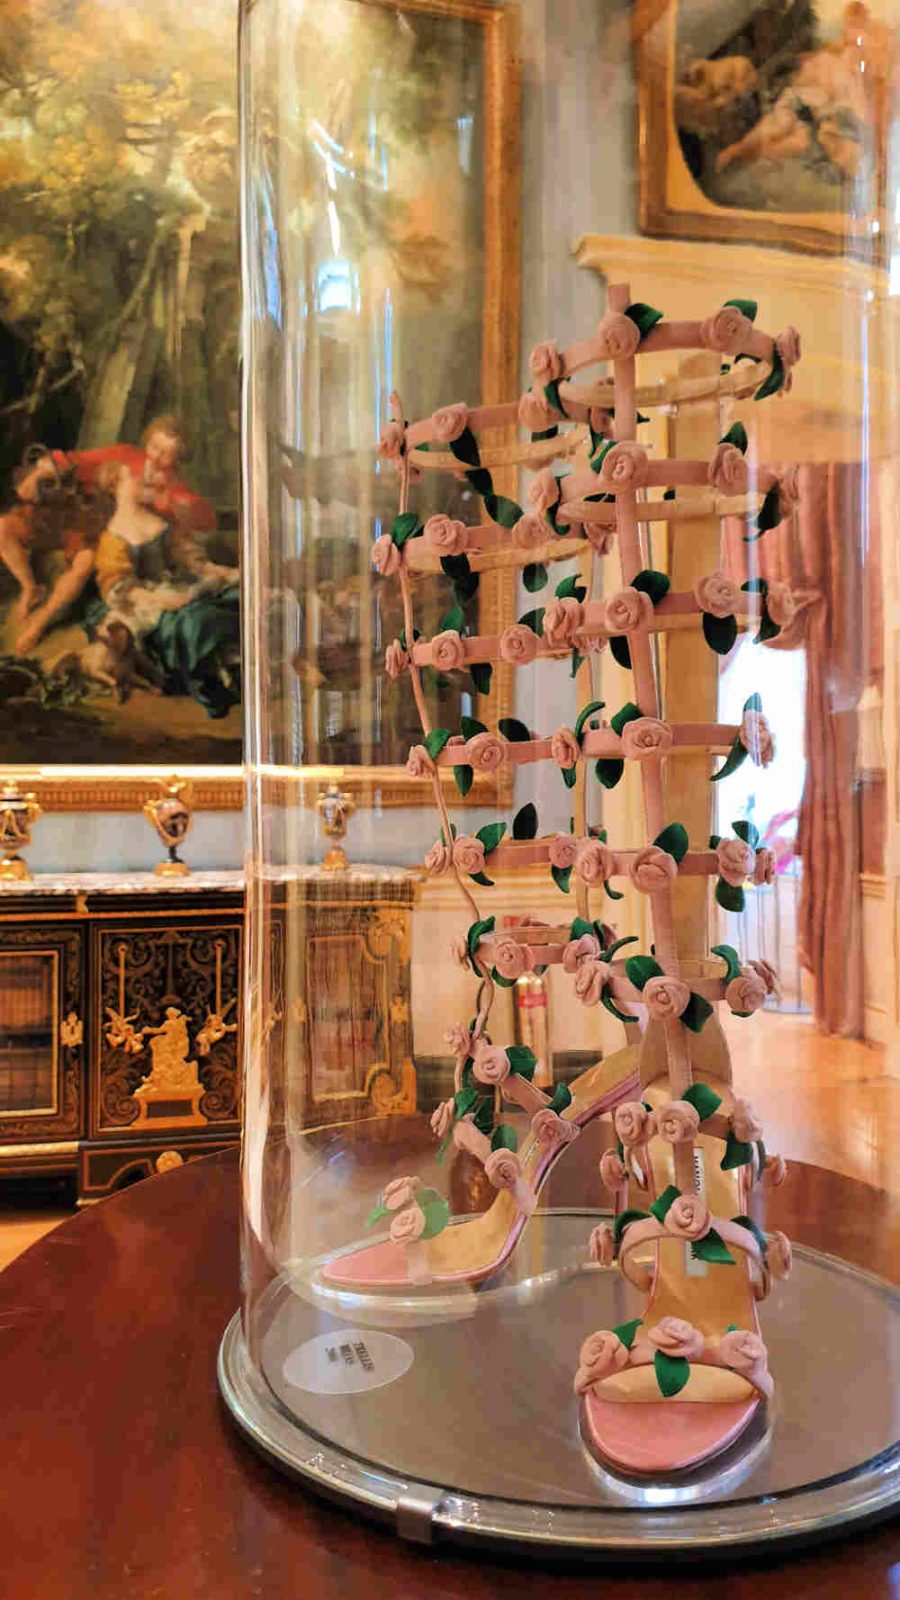 Manolo Blahnik at the Wallace Collection